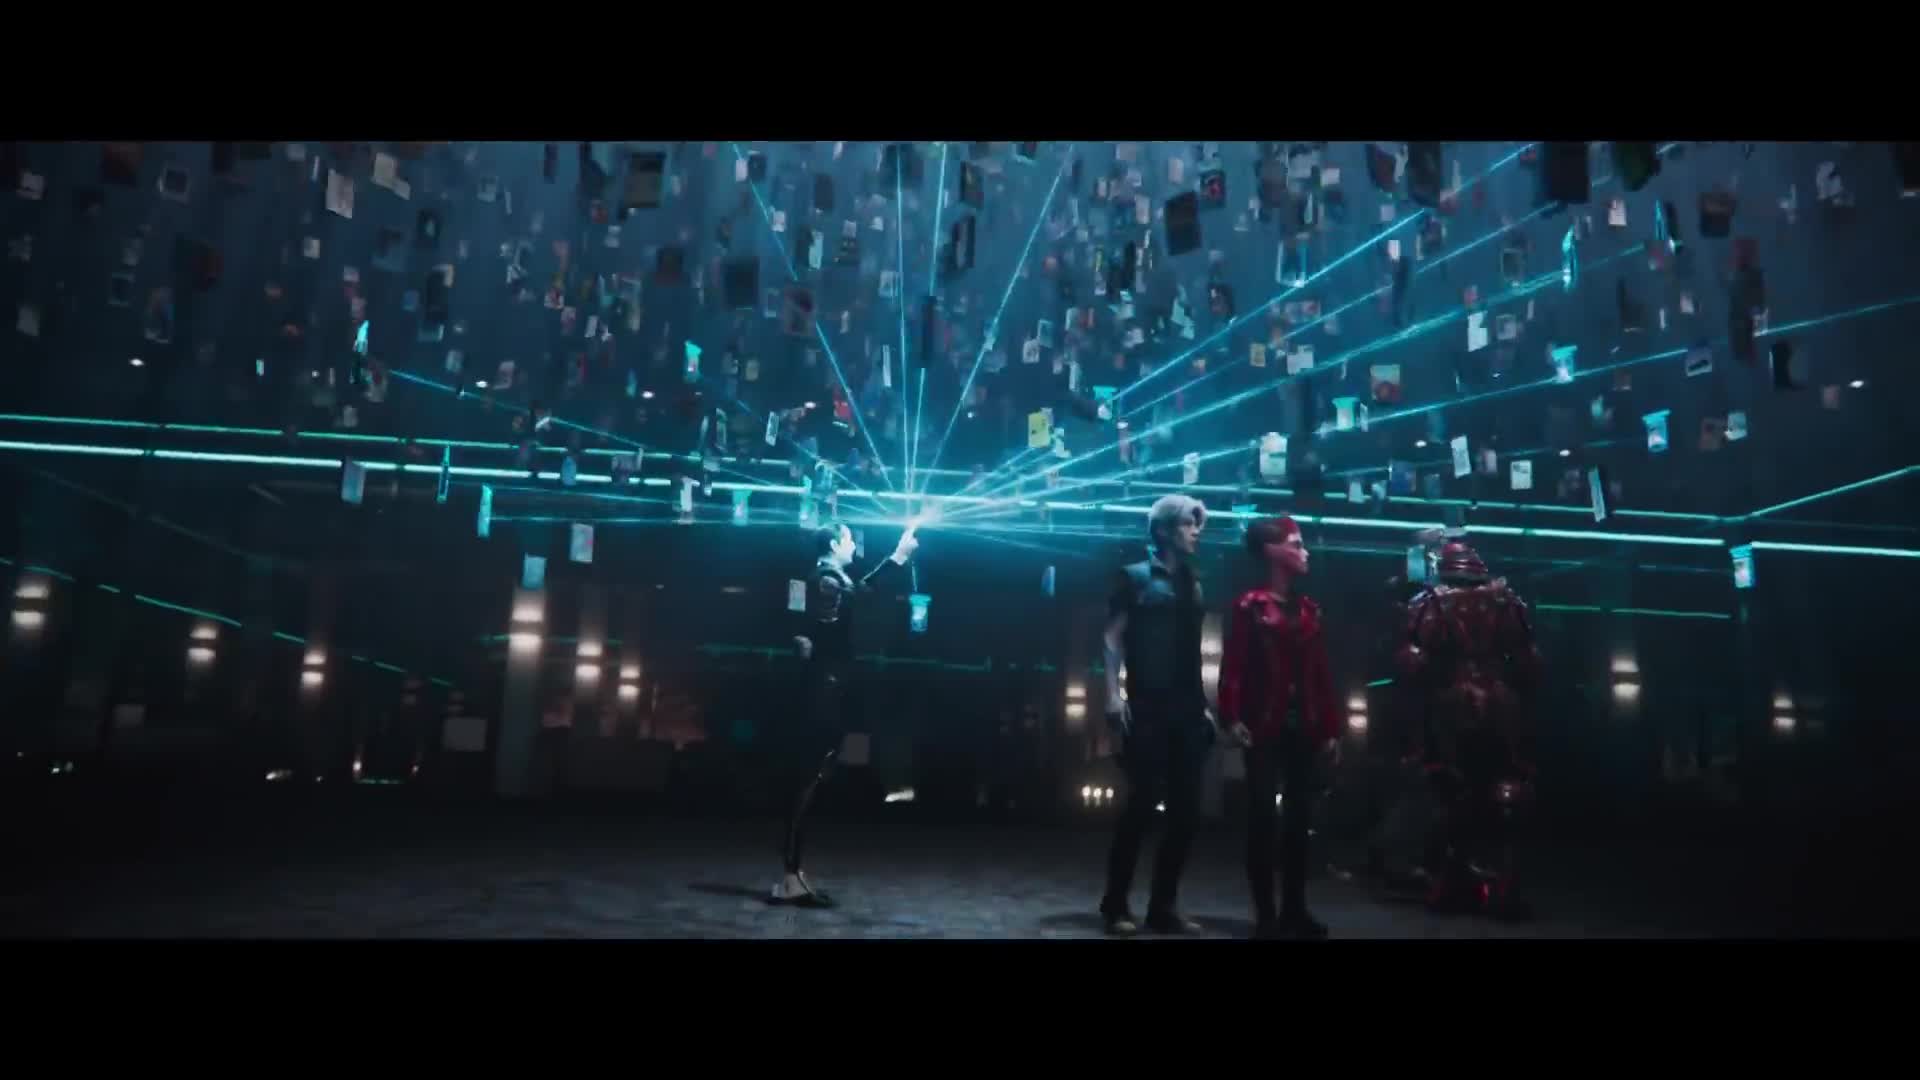 Ready Player One - The Prize Awaits